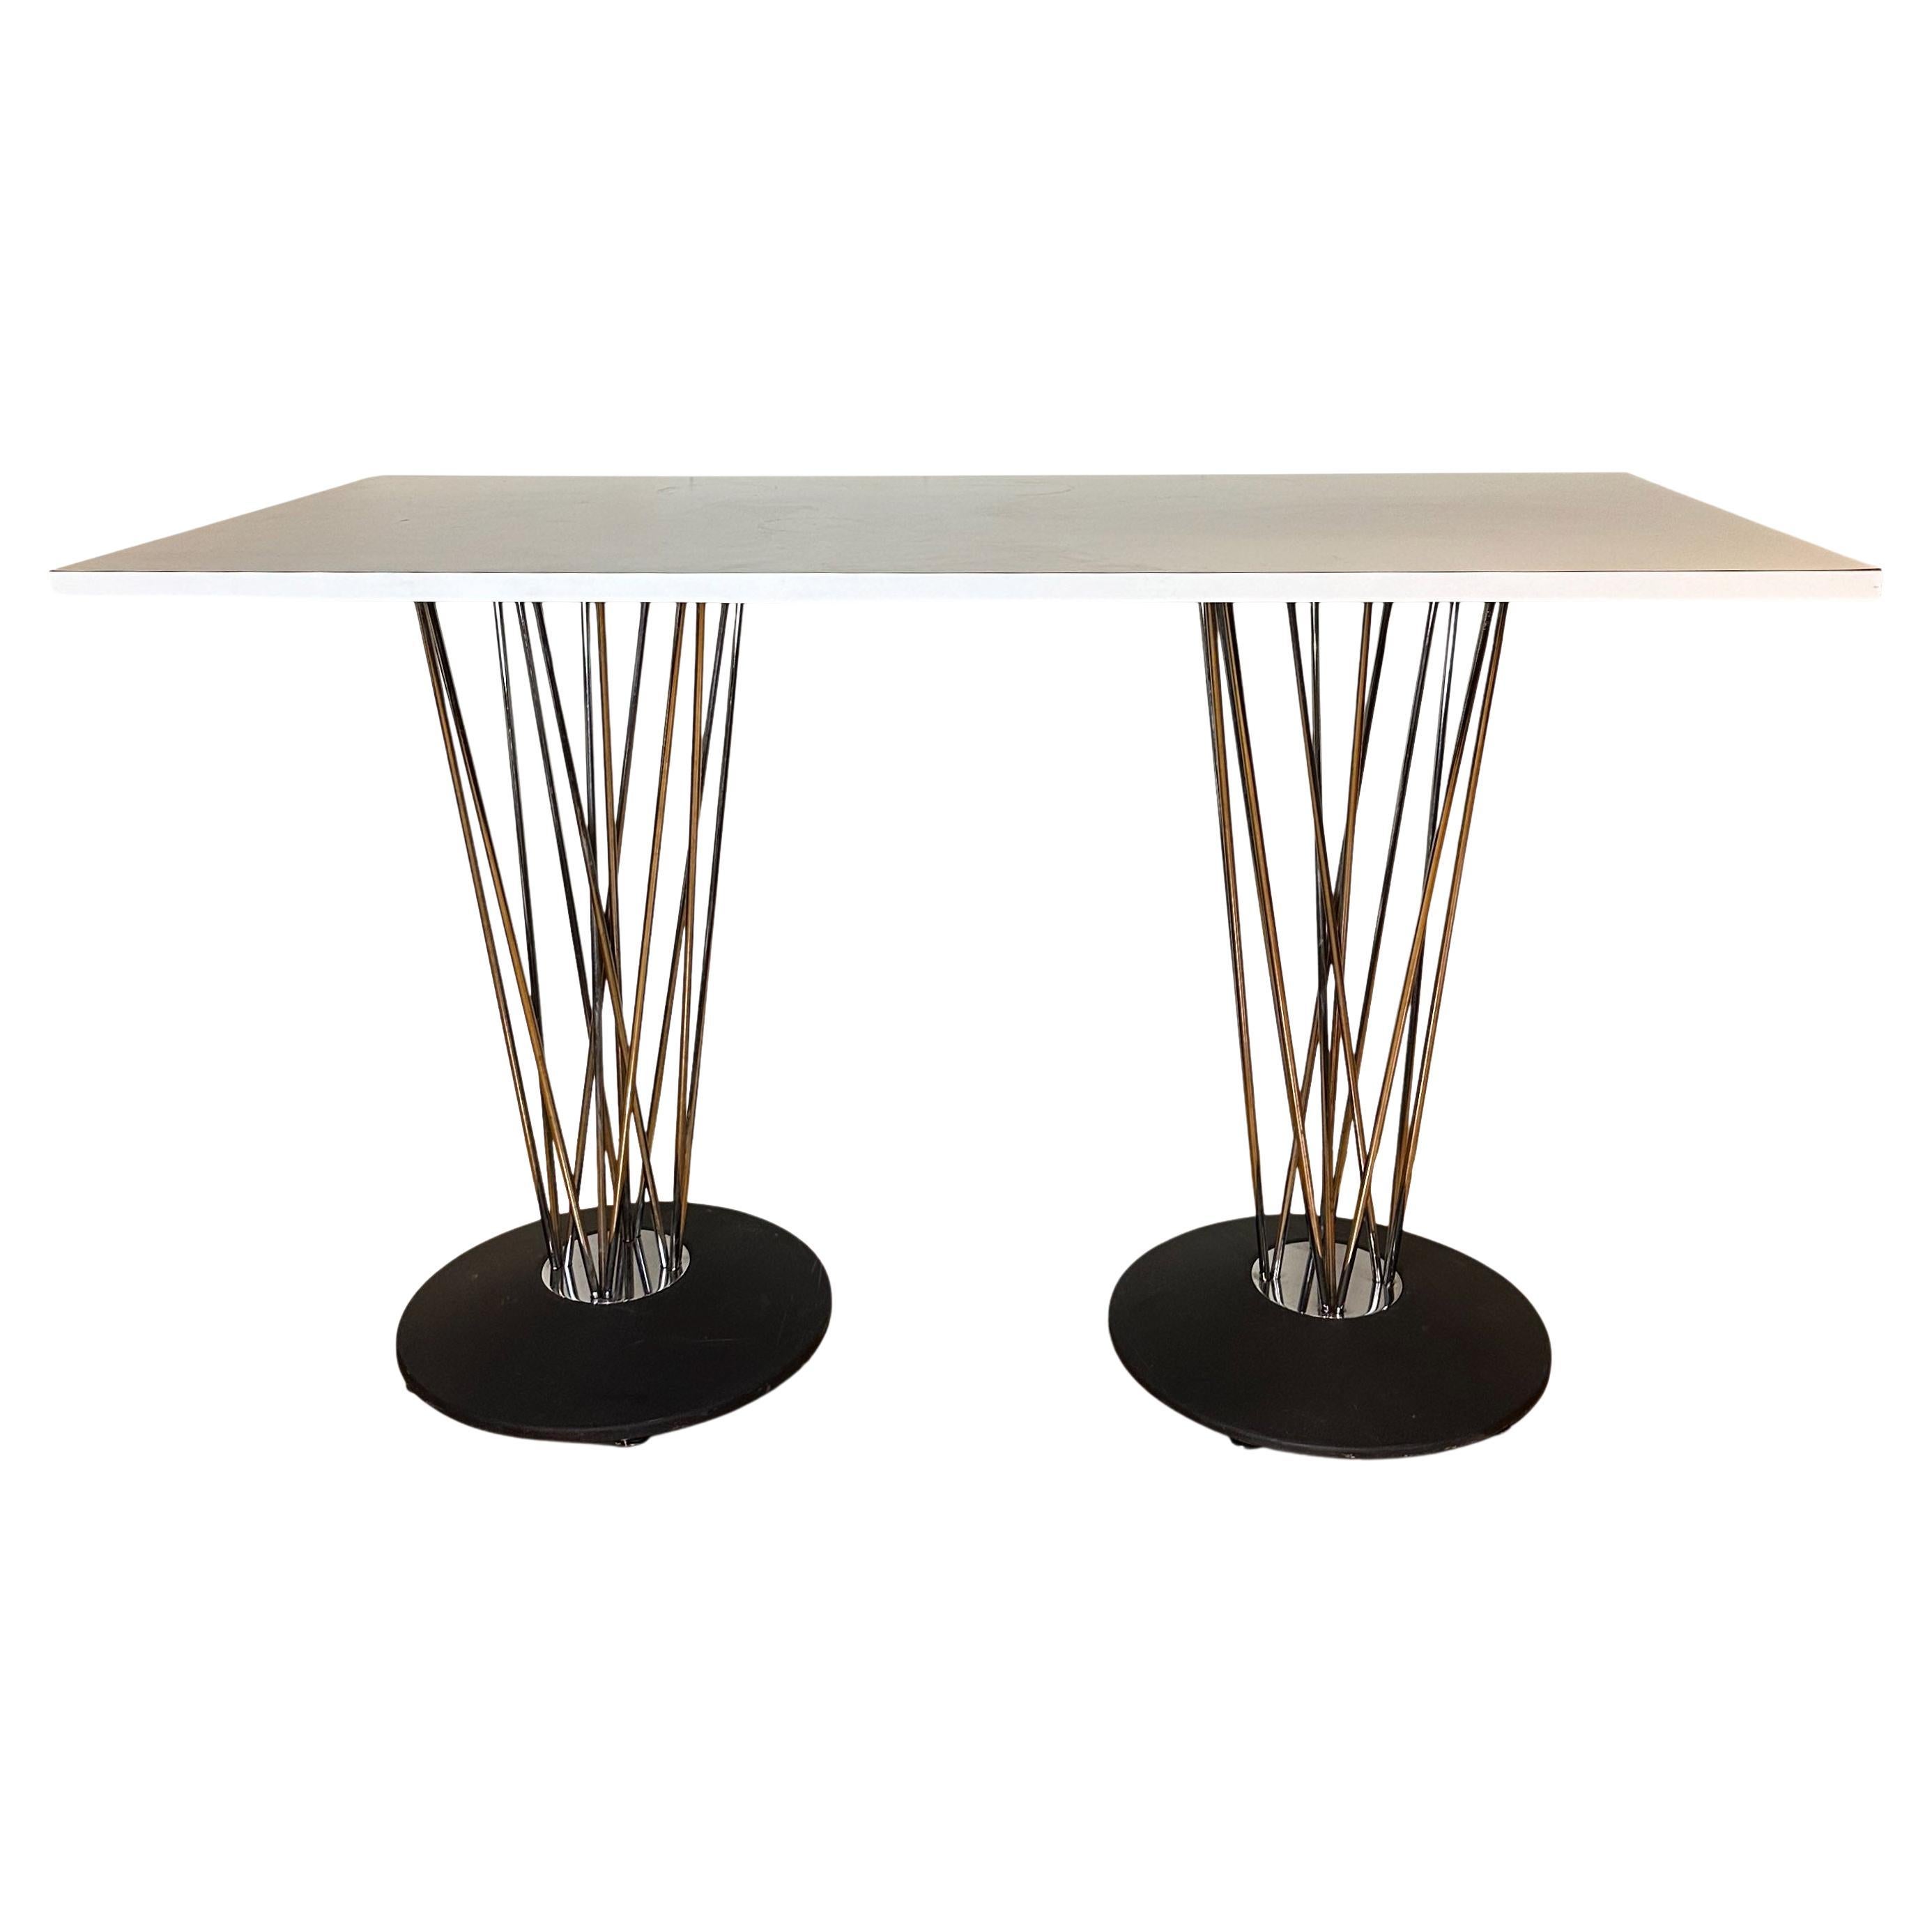 Leland International Marquette Table W/ Stainless Steel Double Pedestal Form For Sale